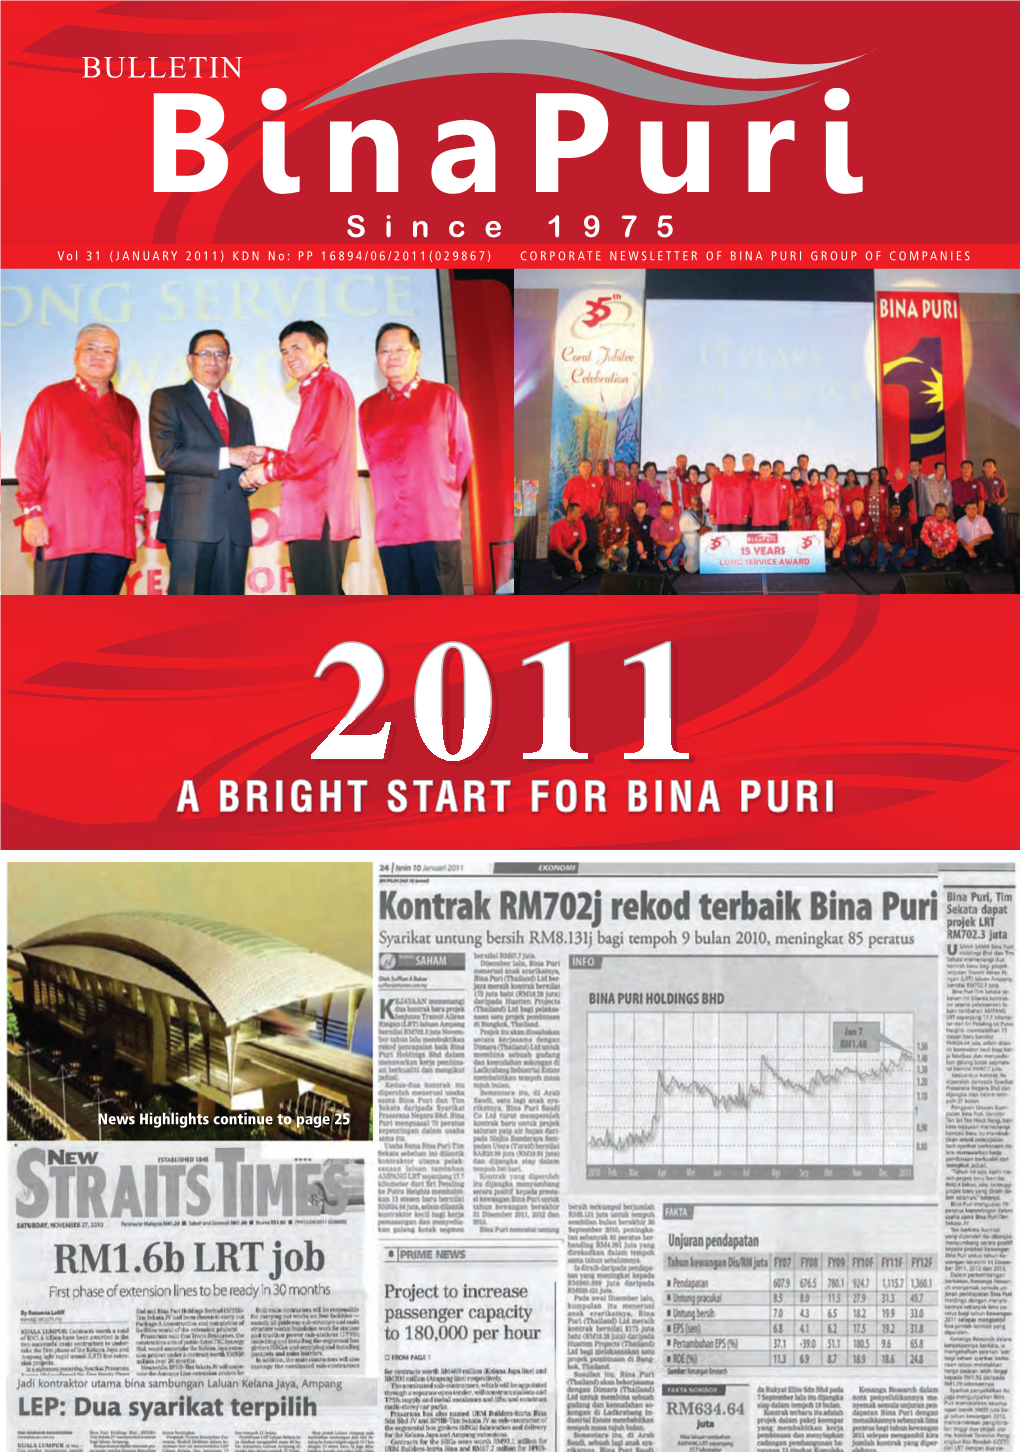 2011) KDN No: PP 16894/06/2011(029867) CORPORATE NEWSLETTER of BINA PURI GROUP of COMPANIES